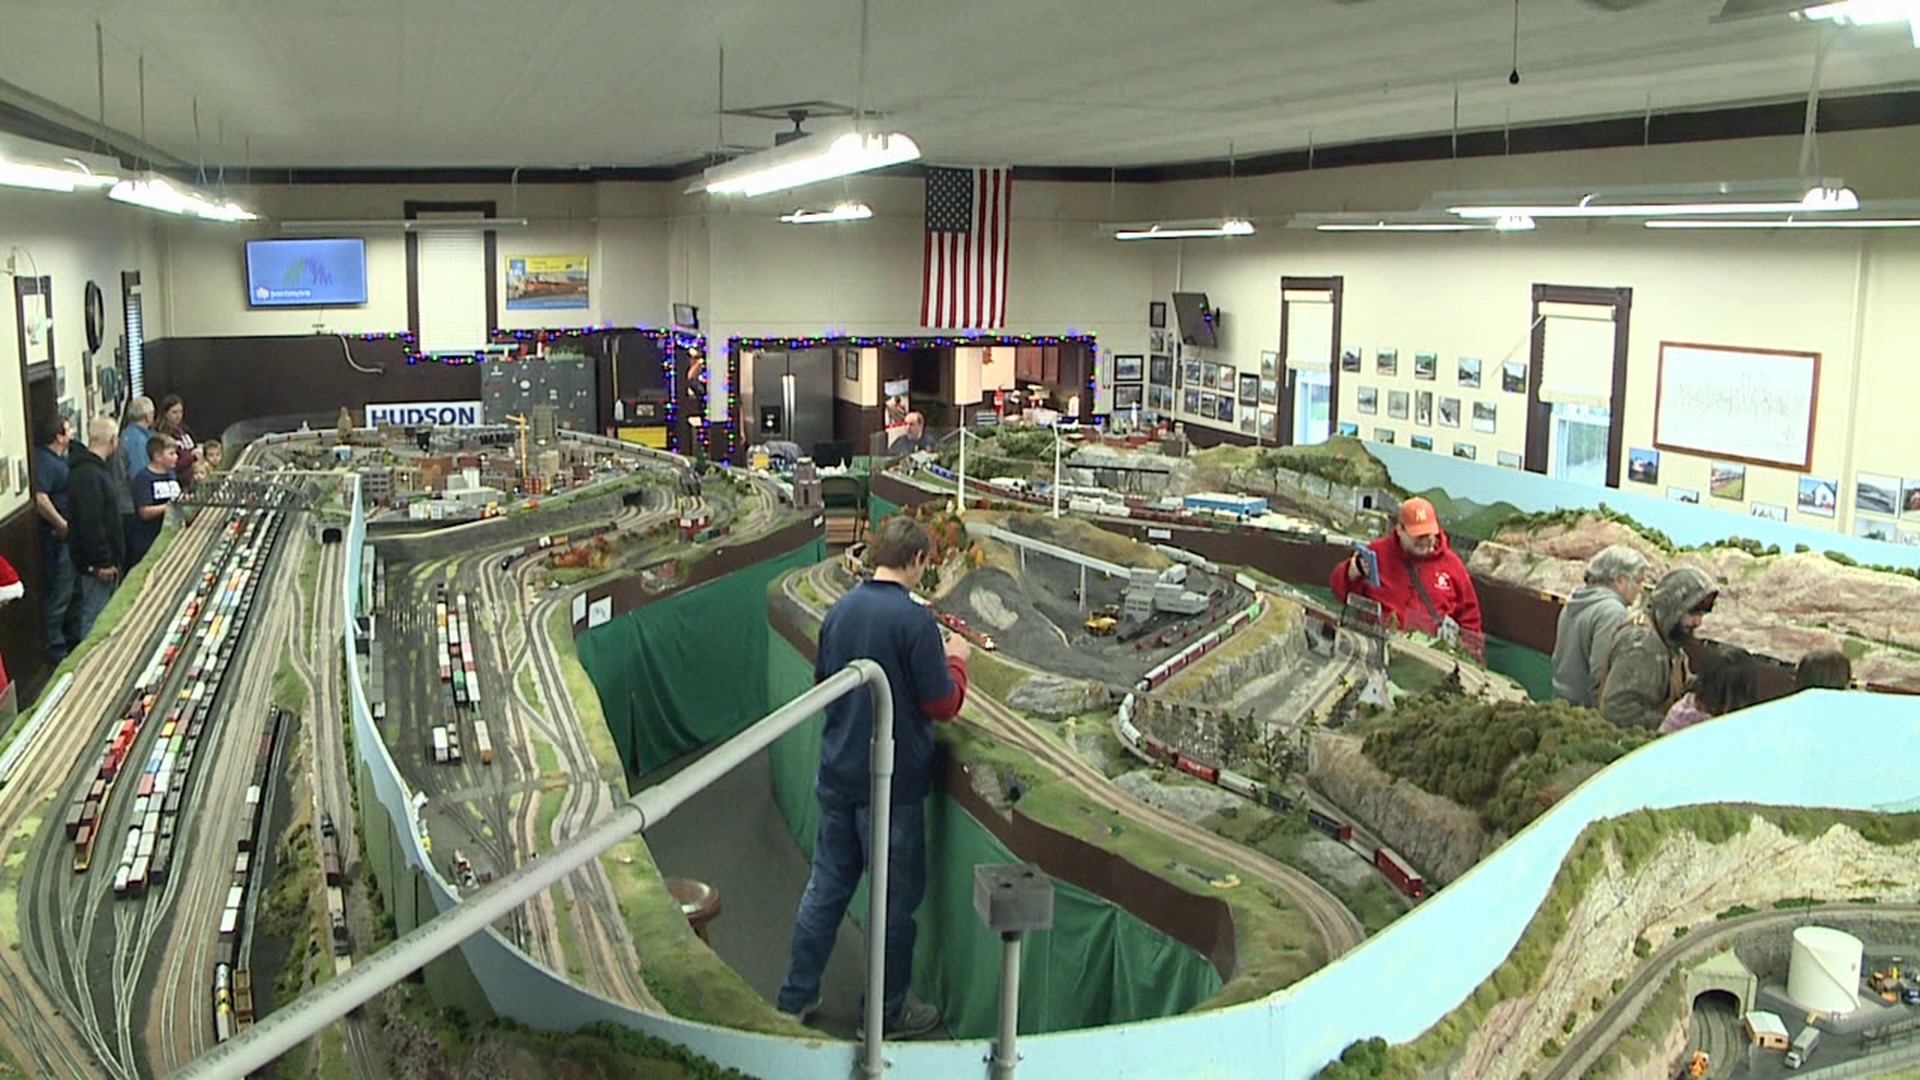 The Hudson Model Railroad Club in Plains Township welcomed folks in for the open house Sunday afternoon.